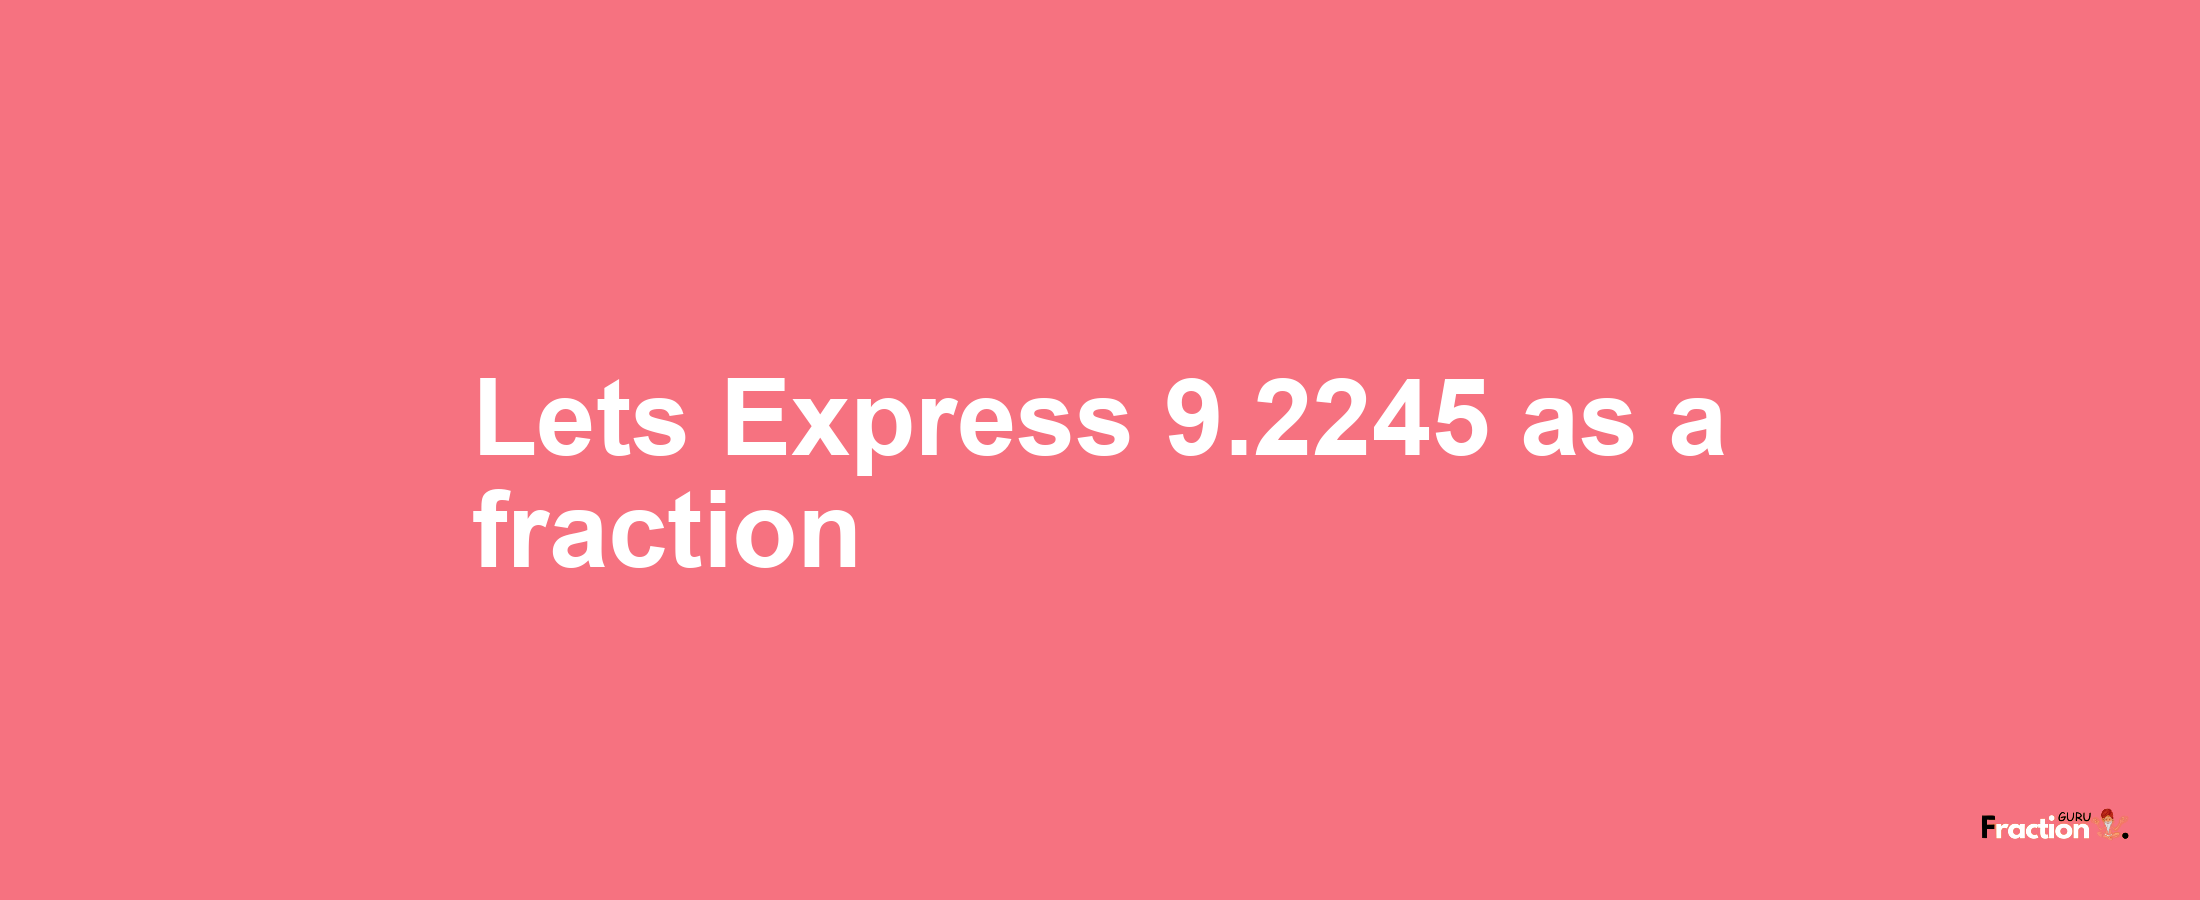 Lets Express 9.2245 as afraction